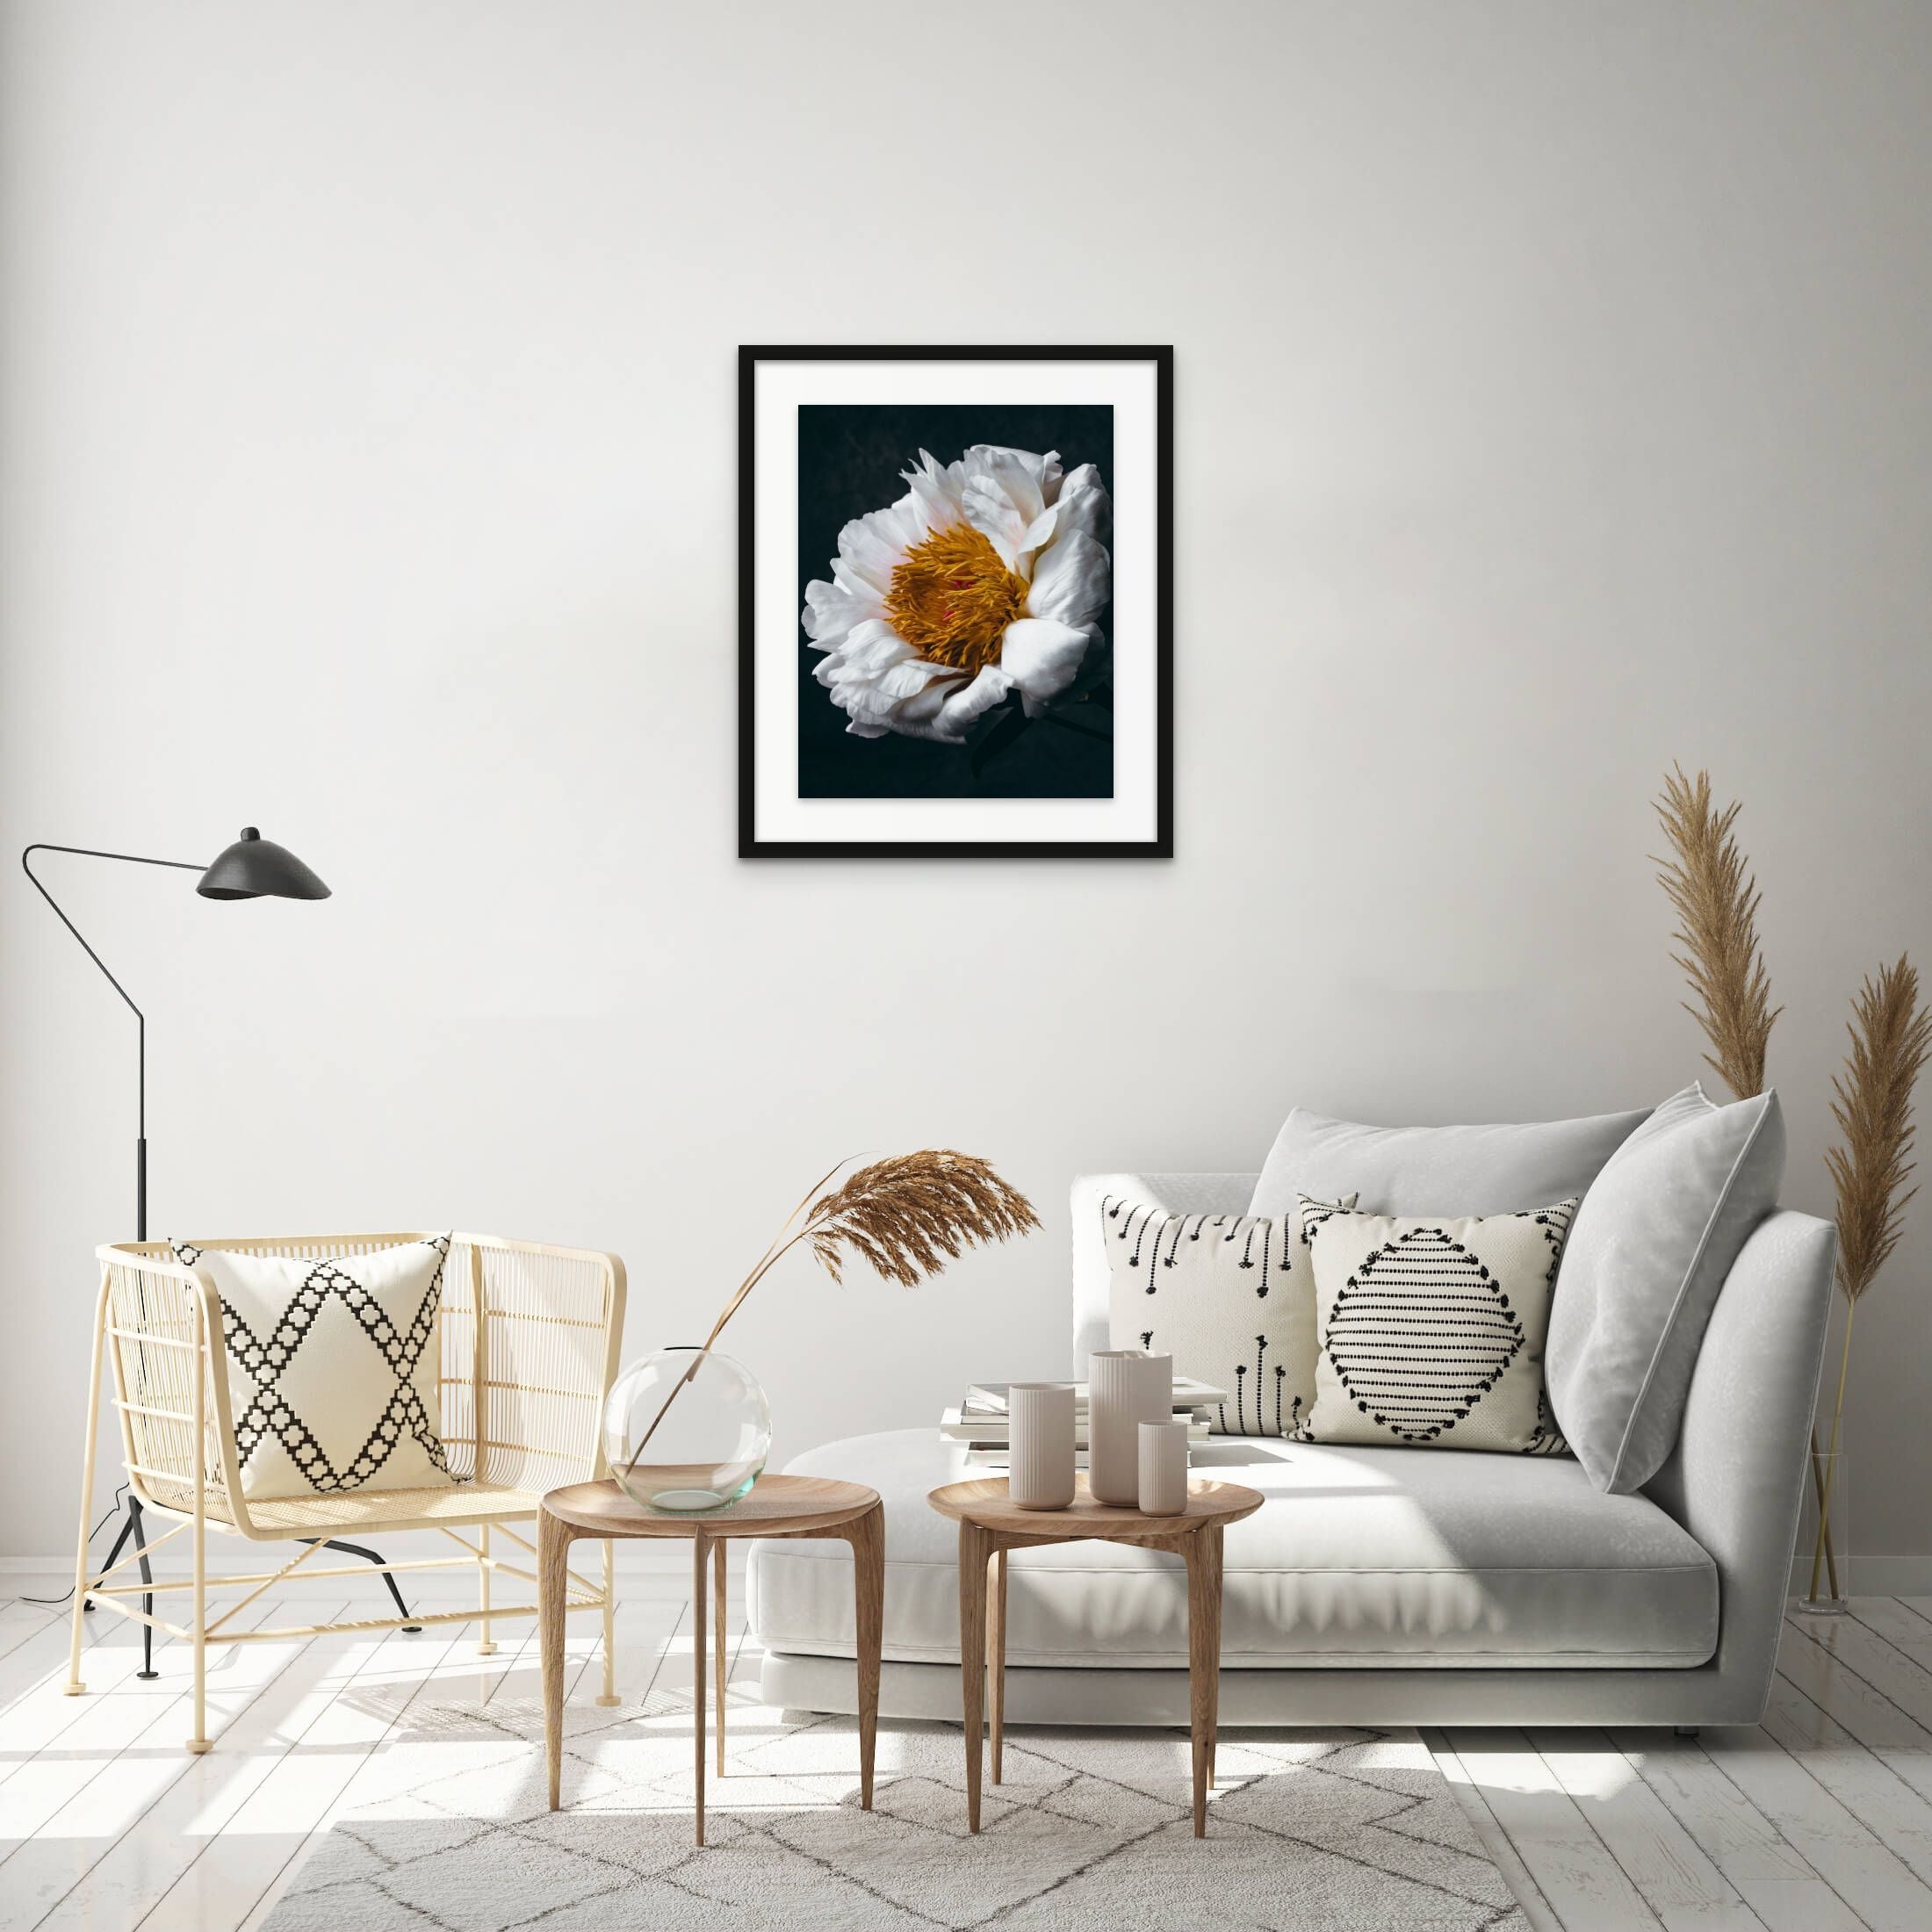 framed white and yellow flower art photo on wall above sofa and chair